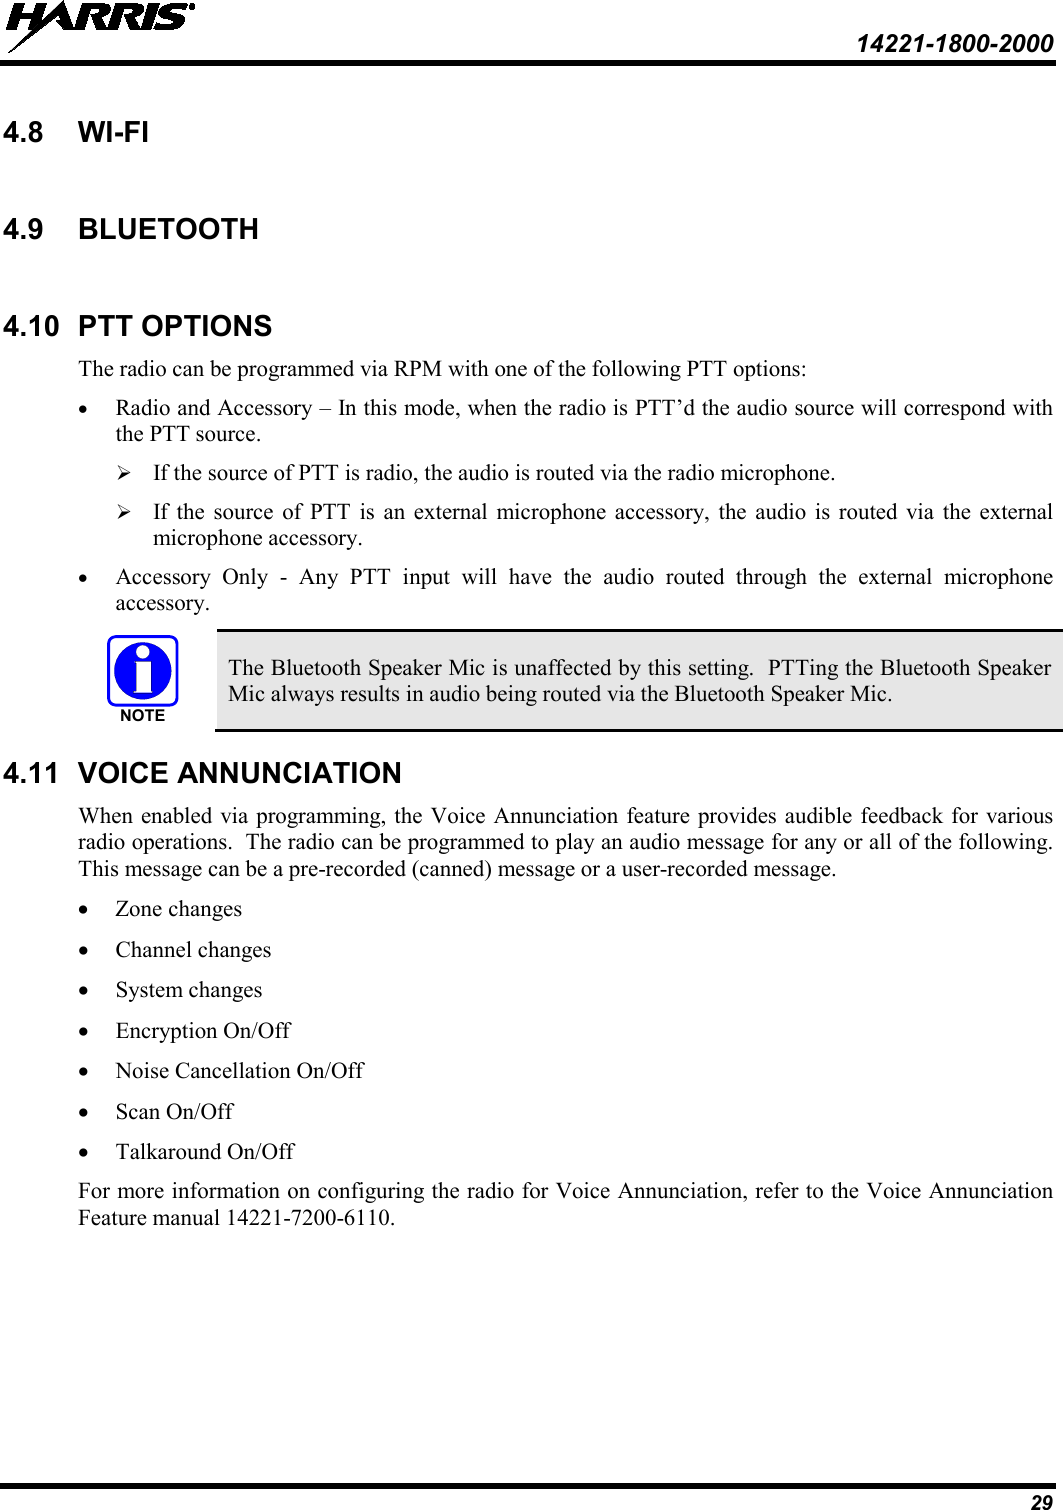  14221-1800-2000 29 4.8 WI-FI  4.9 BLUETOOTH  4.10 PTT OPTIONS The radio can be programmed via RPM with one of the following PTT options: • Radio and Accessory – In this mode, when the radio is PTT’d the audio source will correspond with the PTT source.  If the source of PTT is radio, the audio is routed via the radio microphone.  If the source of PTT is an external microphone accessory, the audio is routed via the external microphone accessory. • Accessory Only -  Any PTT input will have the audio routed through the external microphone accessory.  The Bluetooth Speaker Mic is unaffected by this setting.  PTTing the Bluetooth Speaker Mic always results in audio being routed via the Bluetooth Speaker Mic. 4.11 VOICE ANNUNCIATION When enabled via programming, the Voice Annunciation feature provides audible feedback for various radio operations.  The radio can be programmed to play an audio message for any or all of the following.  This message can be a pre-recorded (canned) message or a user-recorded message.  • Zone changes • Channel changes • System changes • Encryption On/Off • Noise Cancellation On/Off • Scan On/Off • Talkaround On/Off For more information on configuring the radio for Voice Annunciation, refer to the Voice Annunciation Feature manual 14221-7200-6110. NOTE